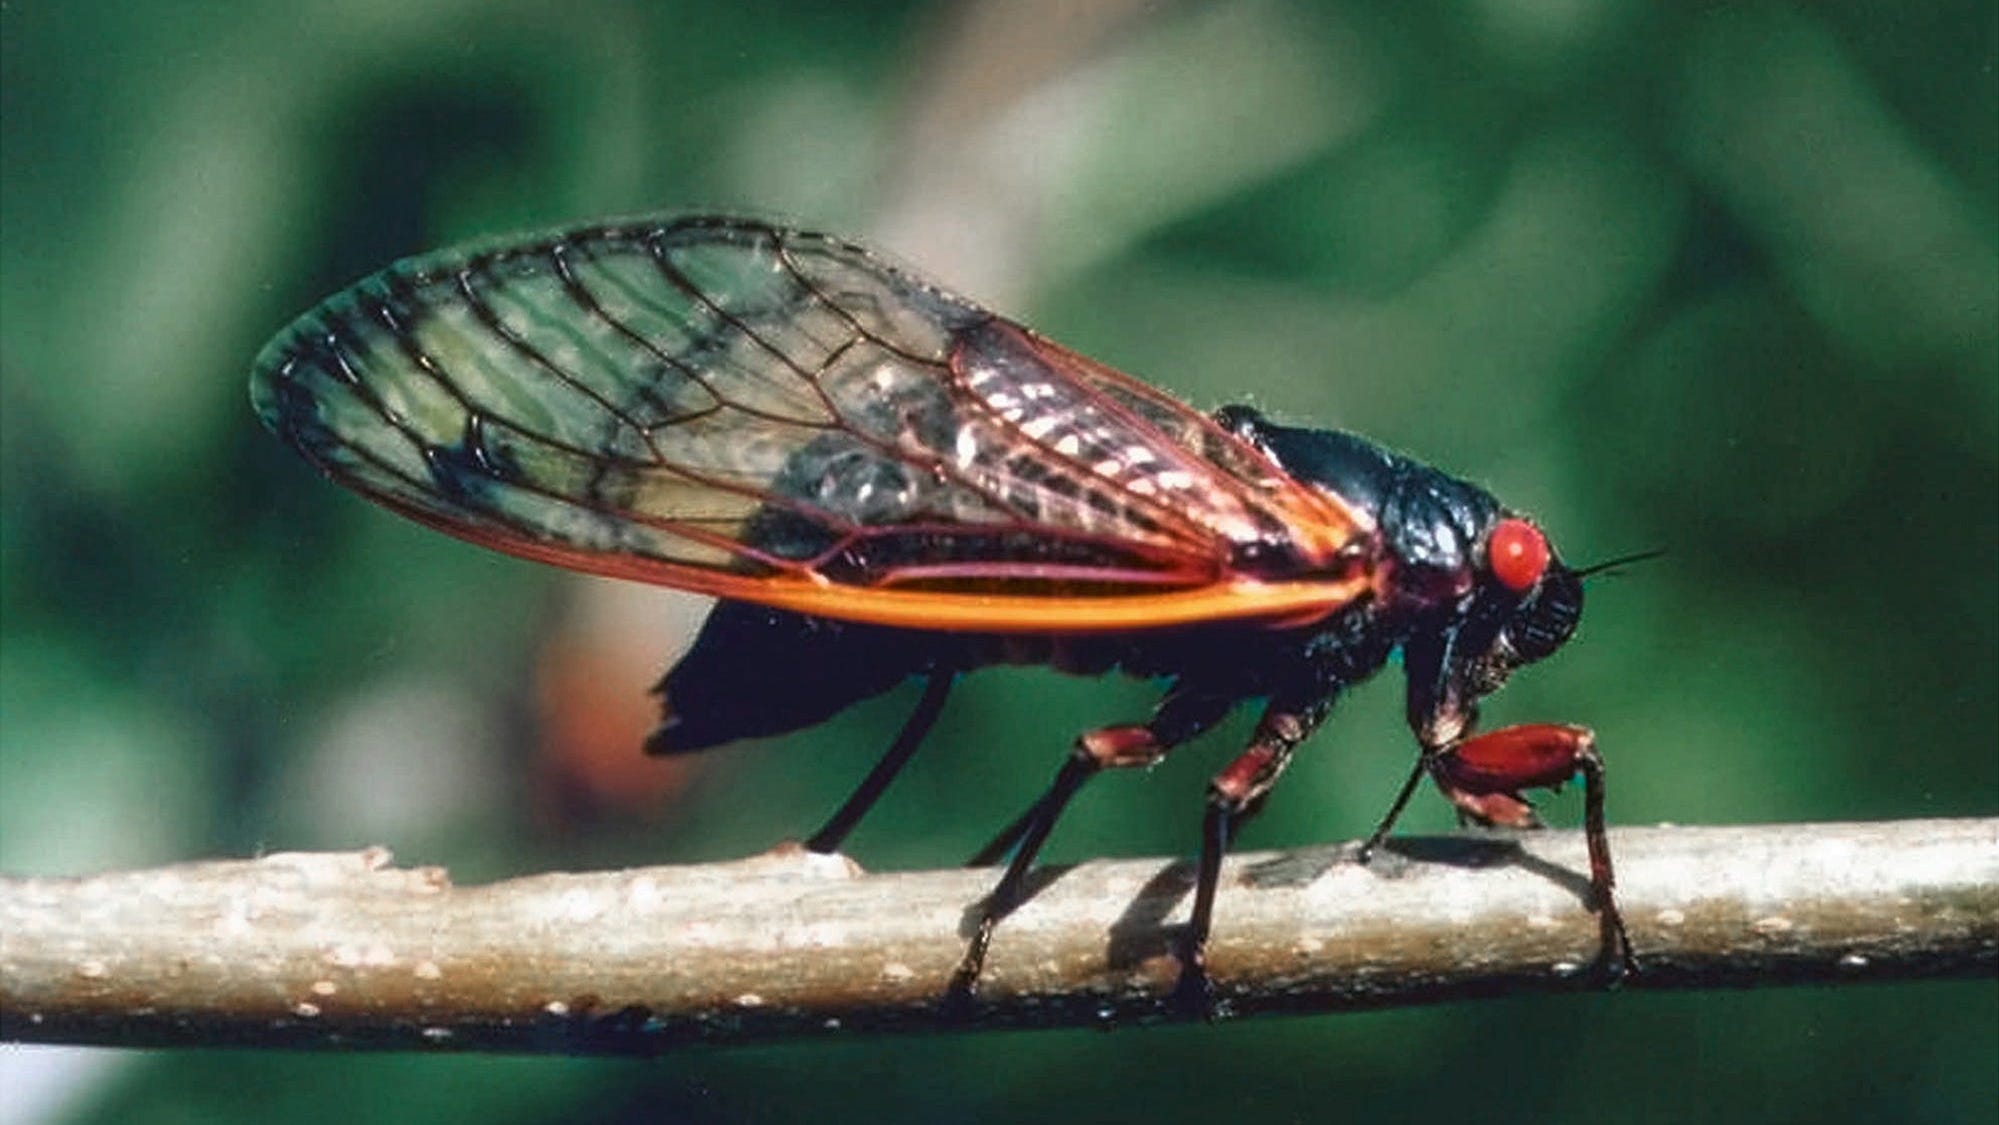 The cicadas are coming! Here's what to expect